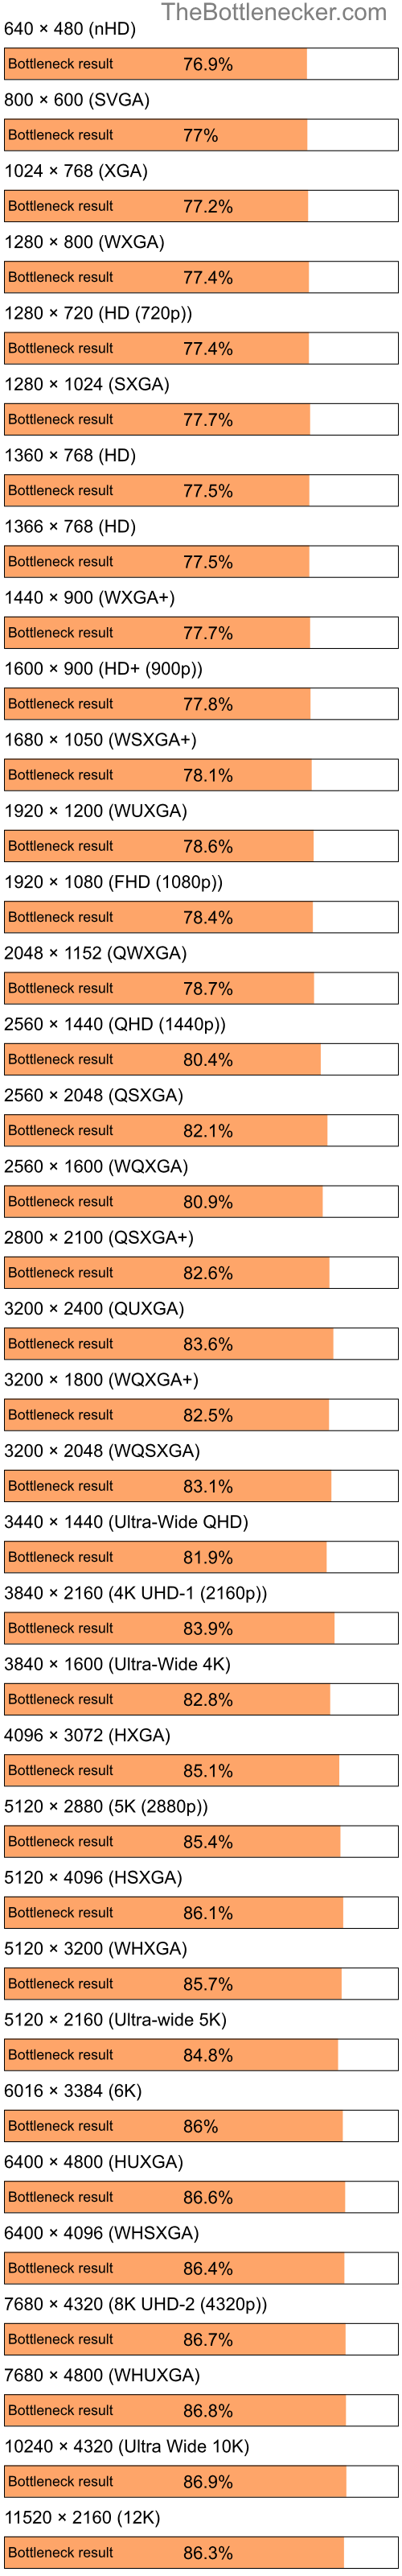 Bottleneck results by resolution for Intel Pentium 4 and NVIDIA GeForce 6150 in Processor Intense Tasks